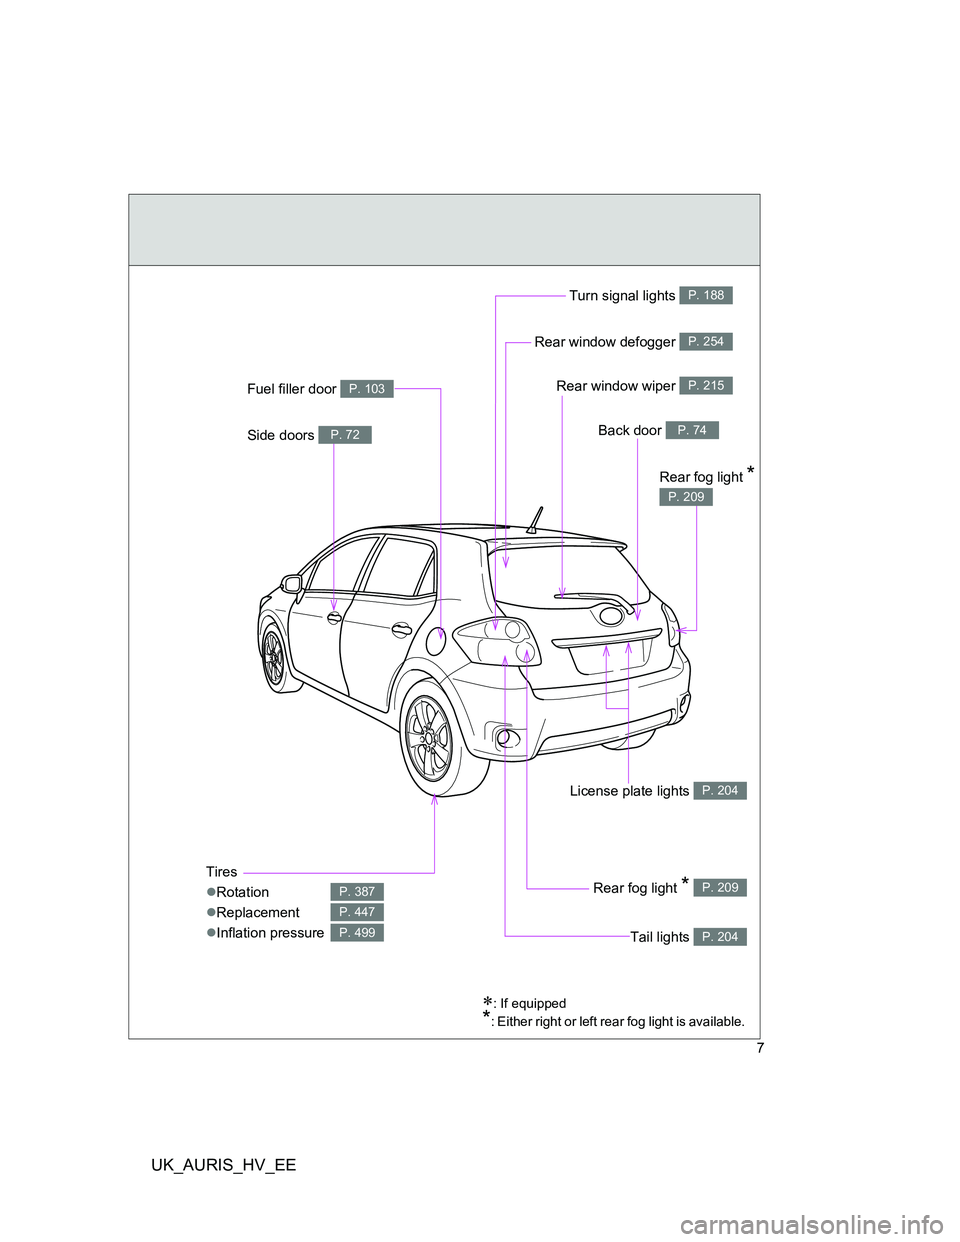 TOYOTA AURIS 2011  Owners Manual (in English) UK_AURIS_HV_EE
7
: If equipped
*: Either right or left rear fog light is available.
Rear window wiper P. 215
Tires
Rotation
Replacement
Inflation pressure
P. 387
P. 447
P. 499
Back door P.